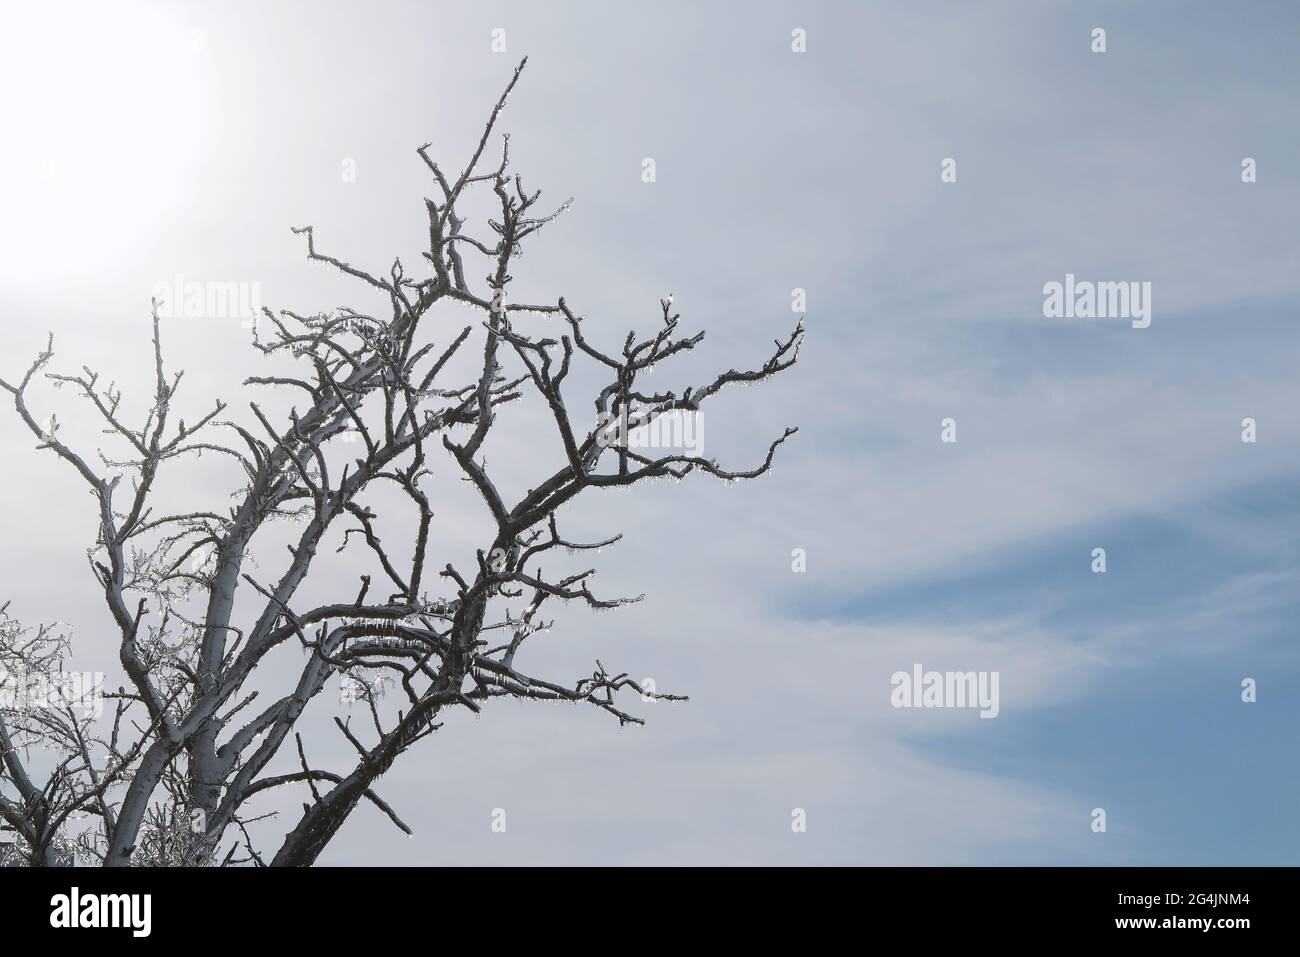 Branches of trees and plants covered with ice. Winter landscape after icing. Nature in winter. Trees after an icy rain. Winter has come. Stock Photo